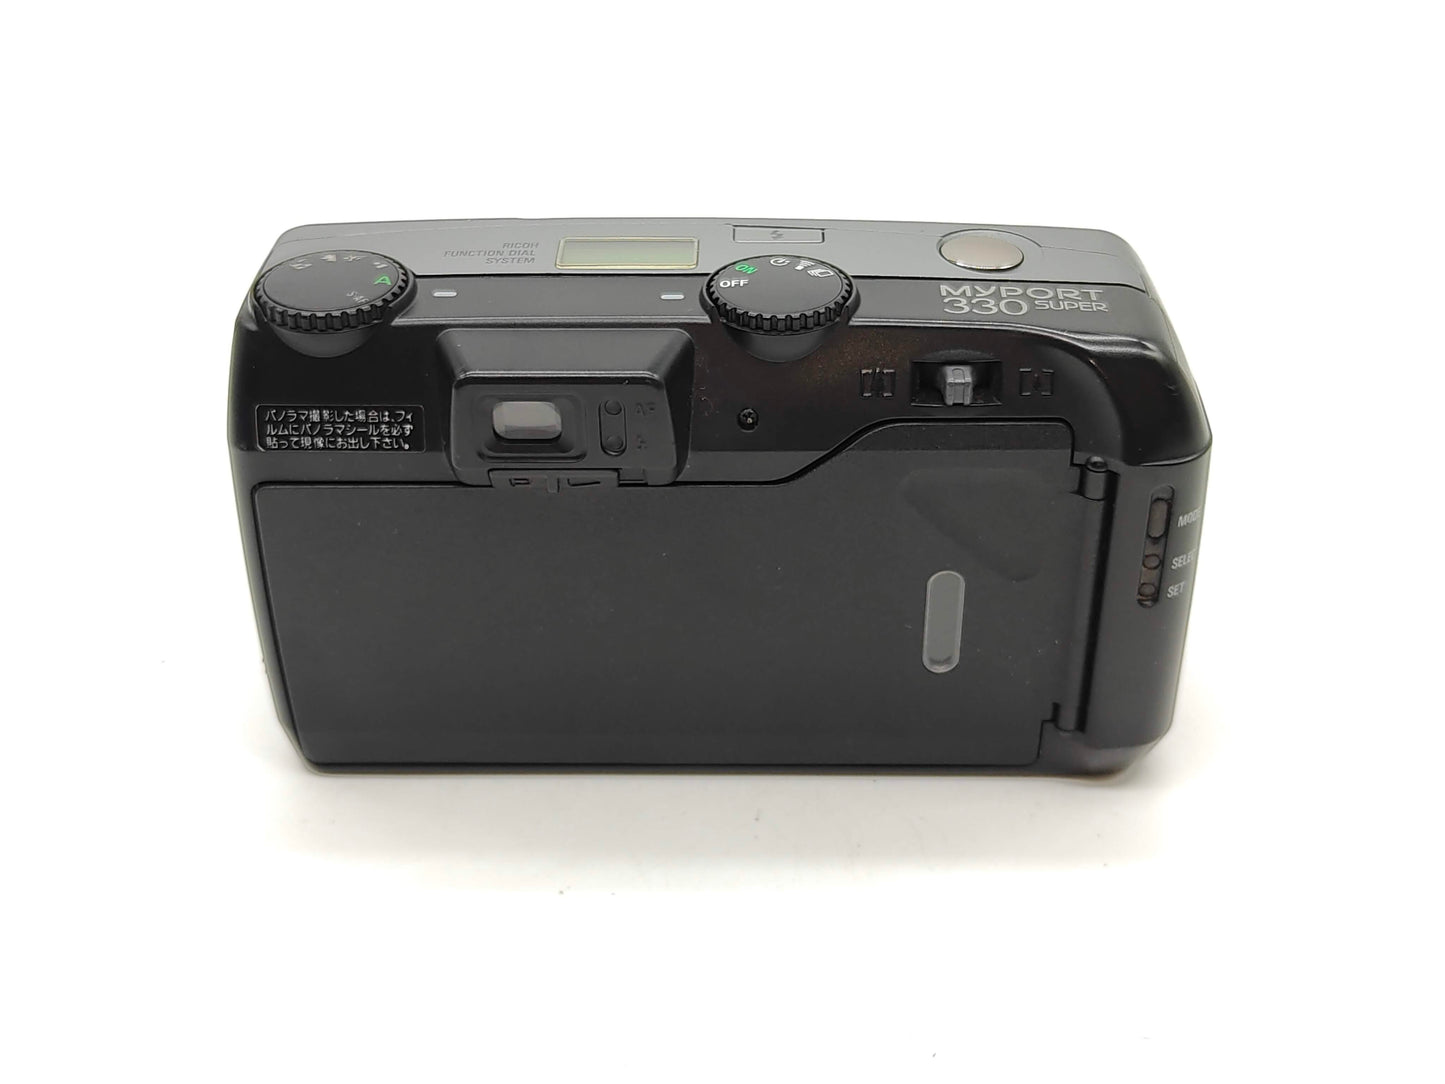 Ricoh MyPort 330 Super point-and-shoot film camera with box